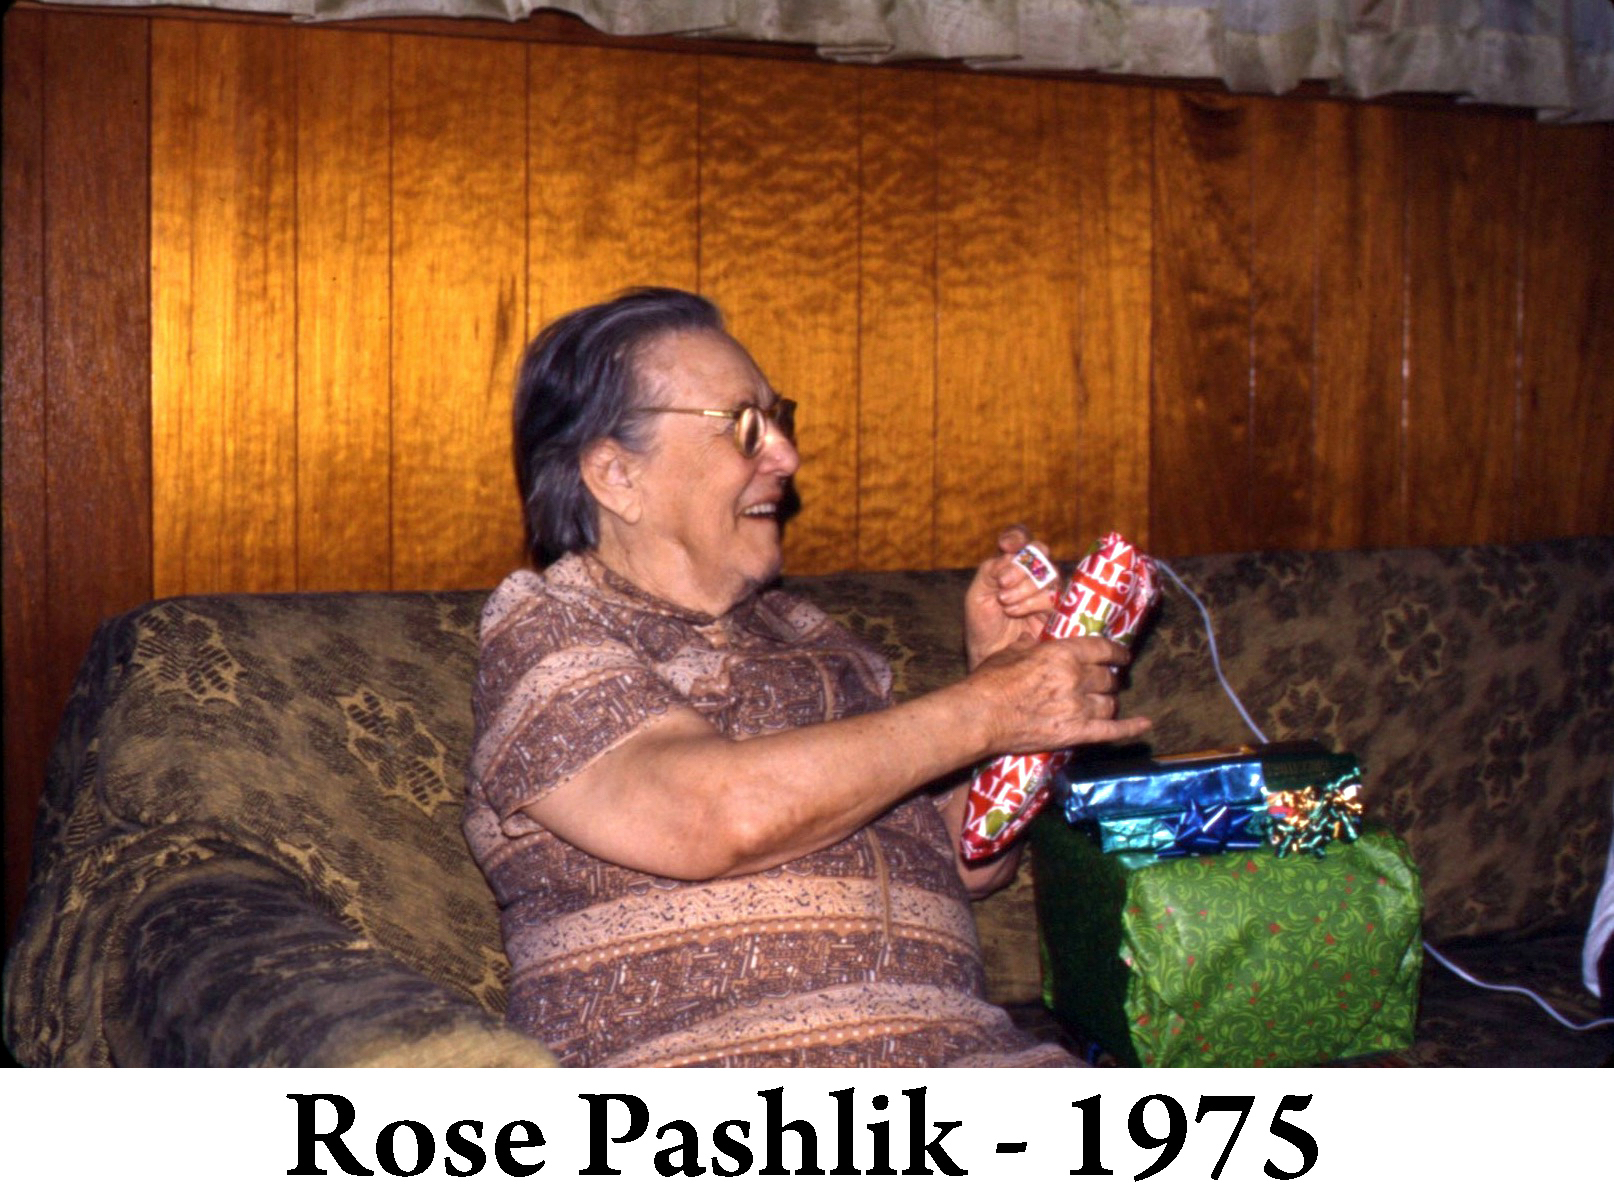 Rose is sitting on the sofa and smiling as she opens a gift-wrapped package. 